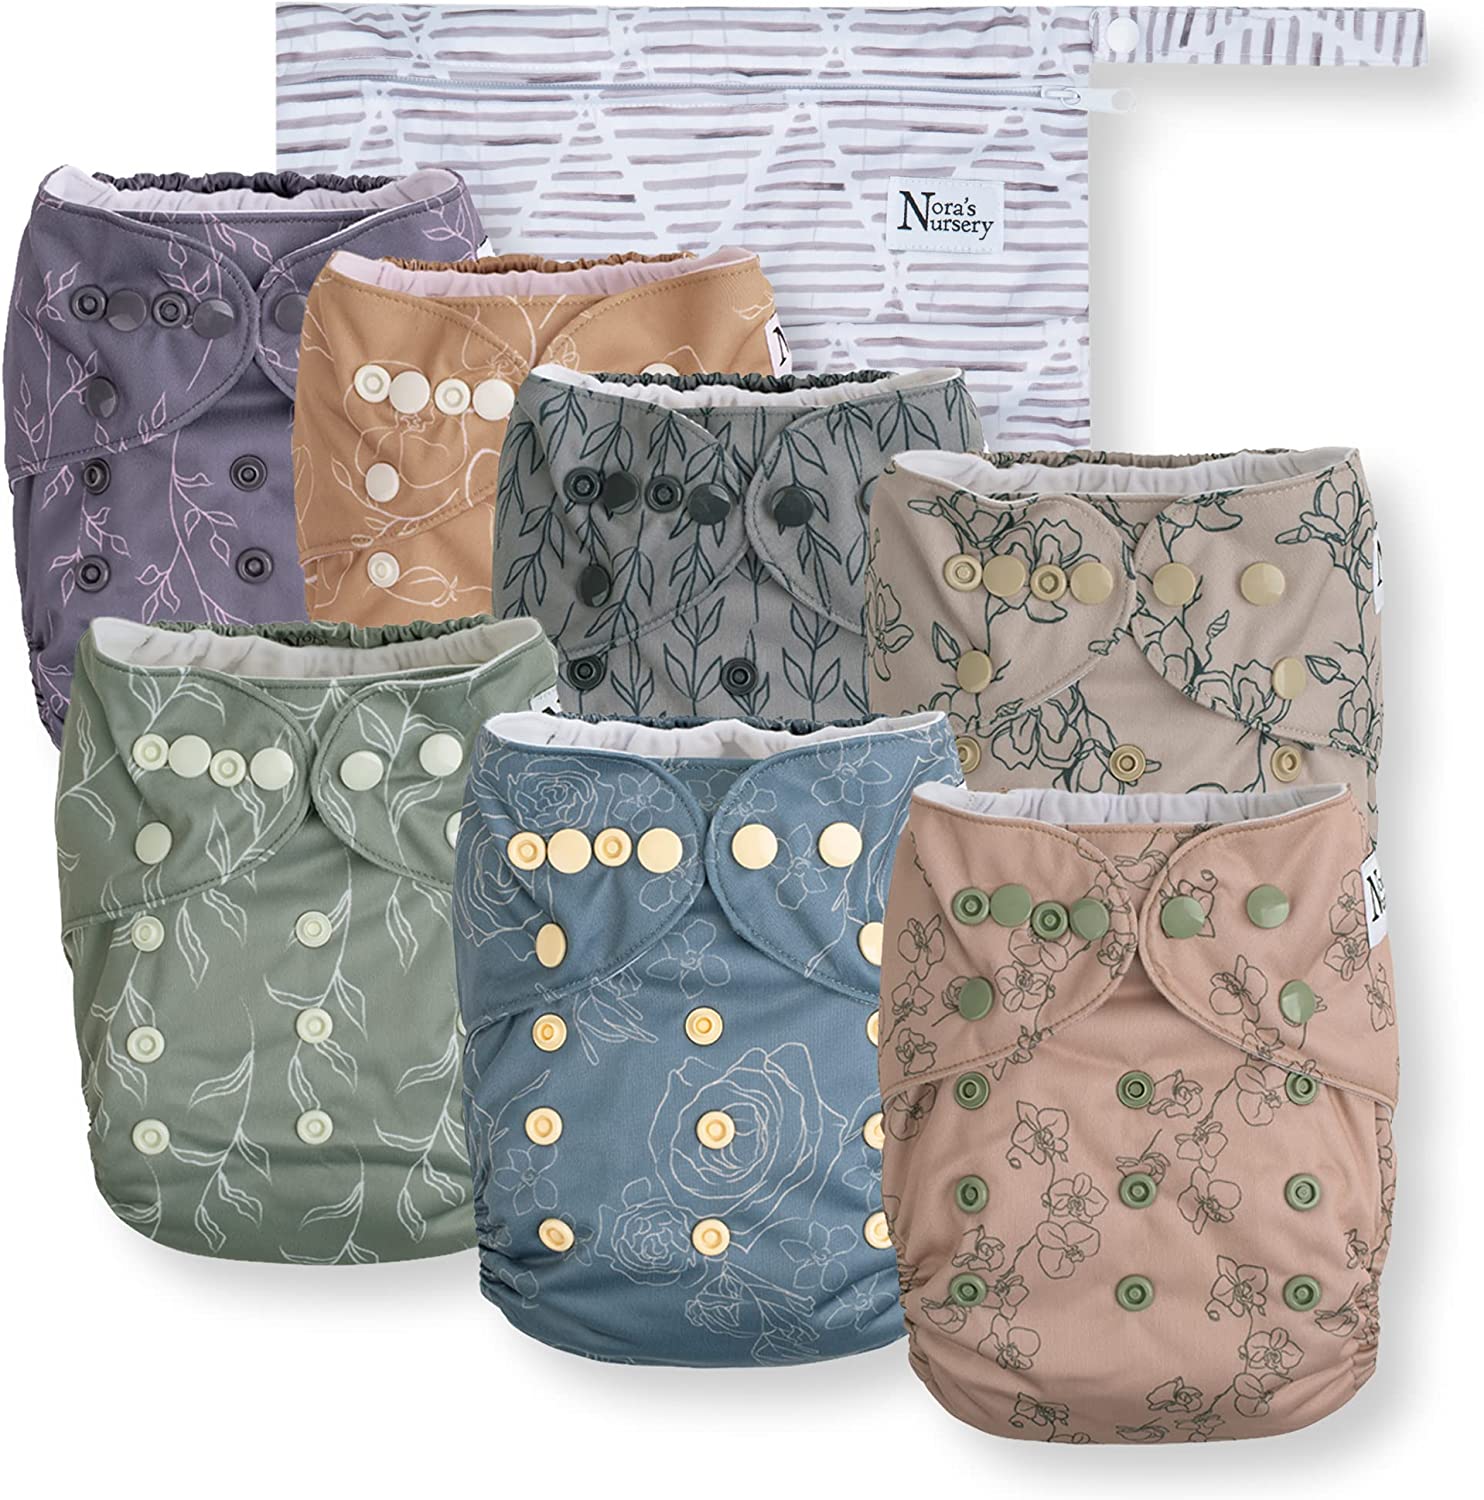 Modern Blooms Baby Cloth Pocket Diapers 7 Pack, 7 Bamboo Inserts, 1 Wet Bag by Nora’s Nursery